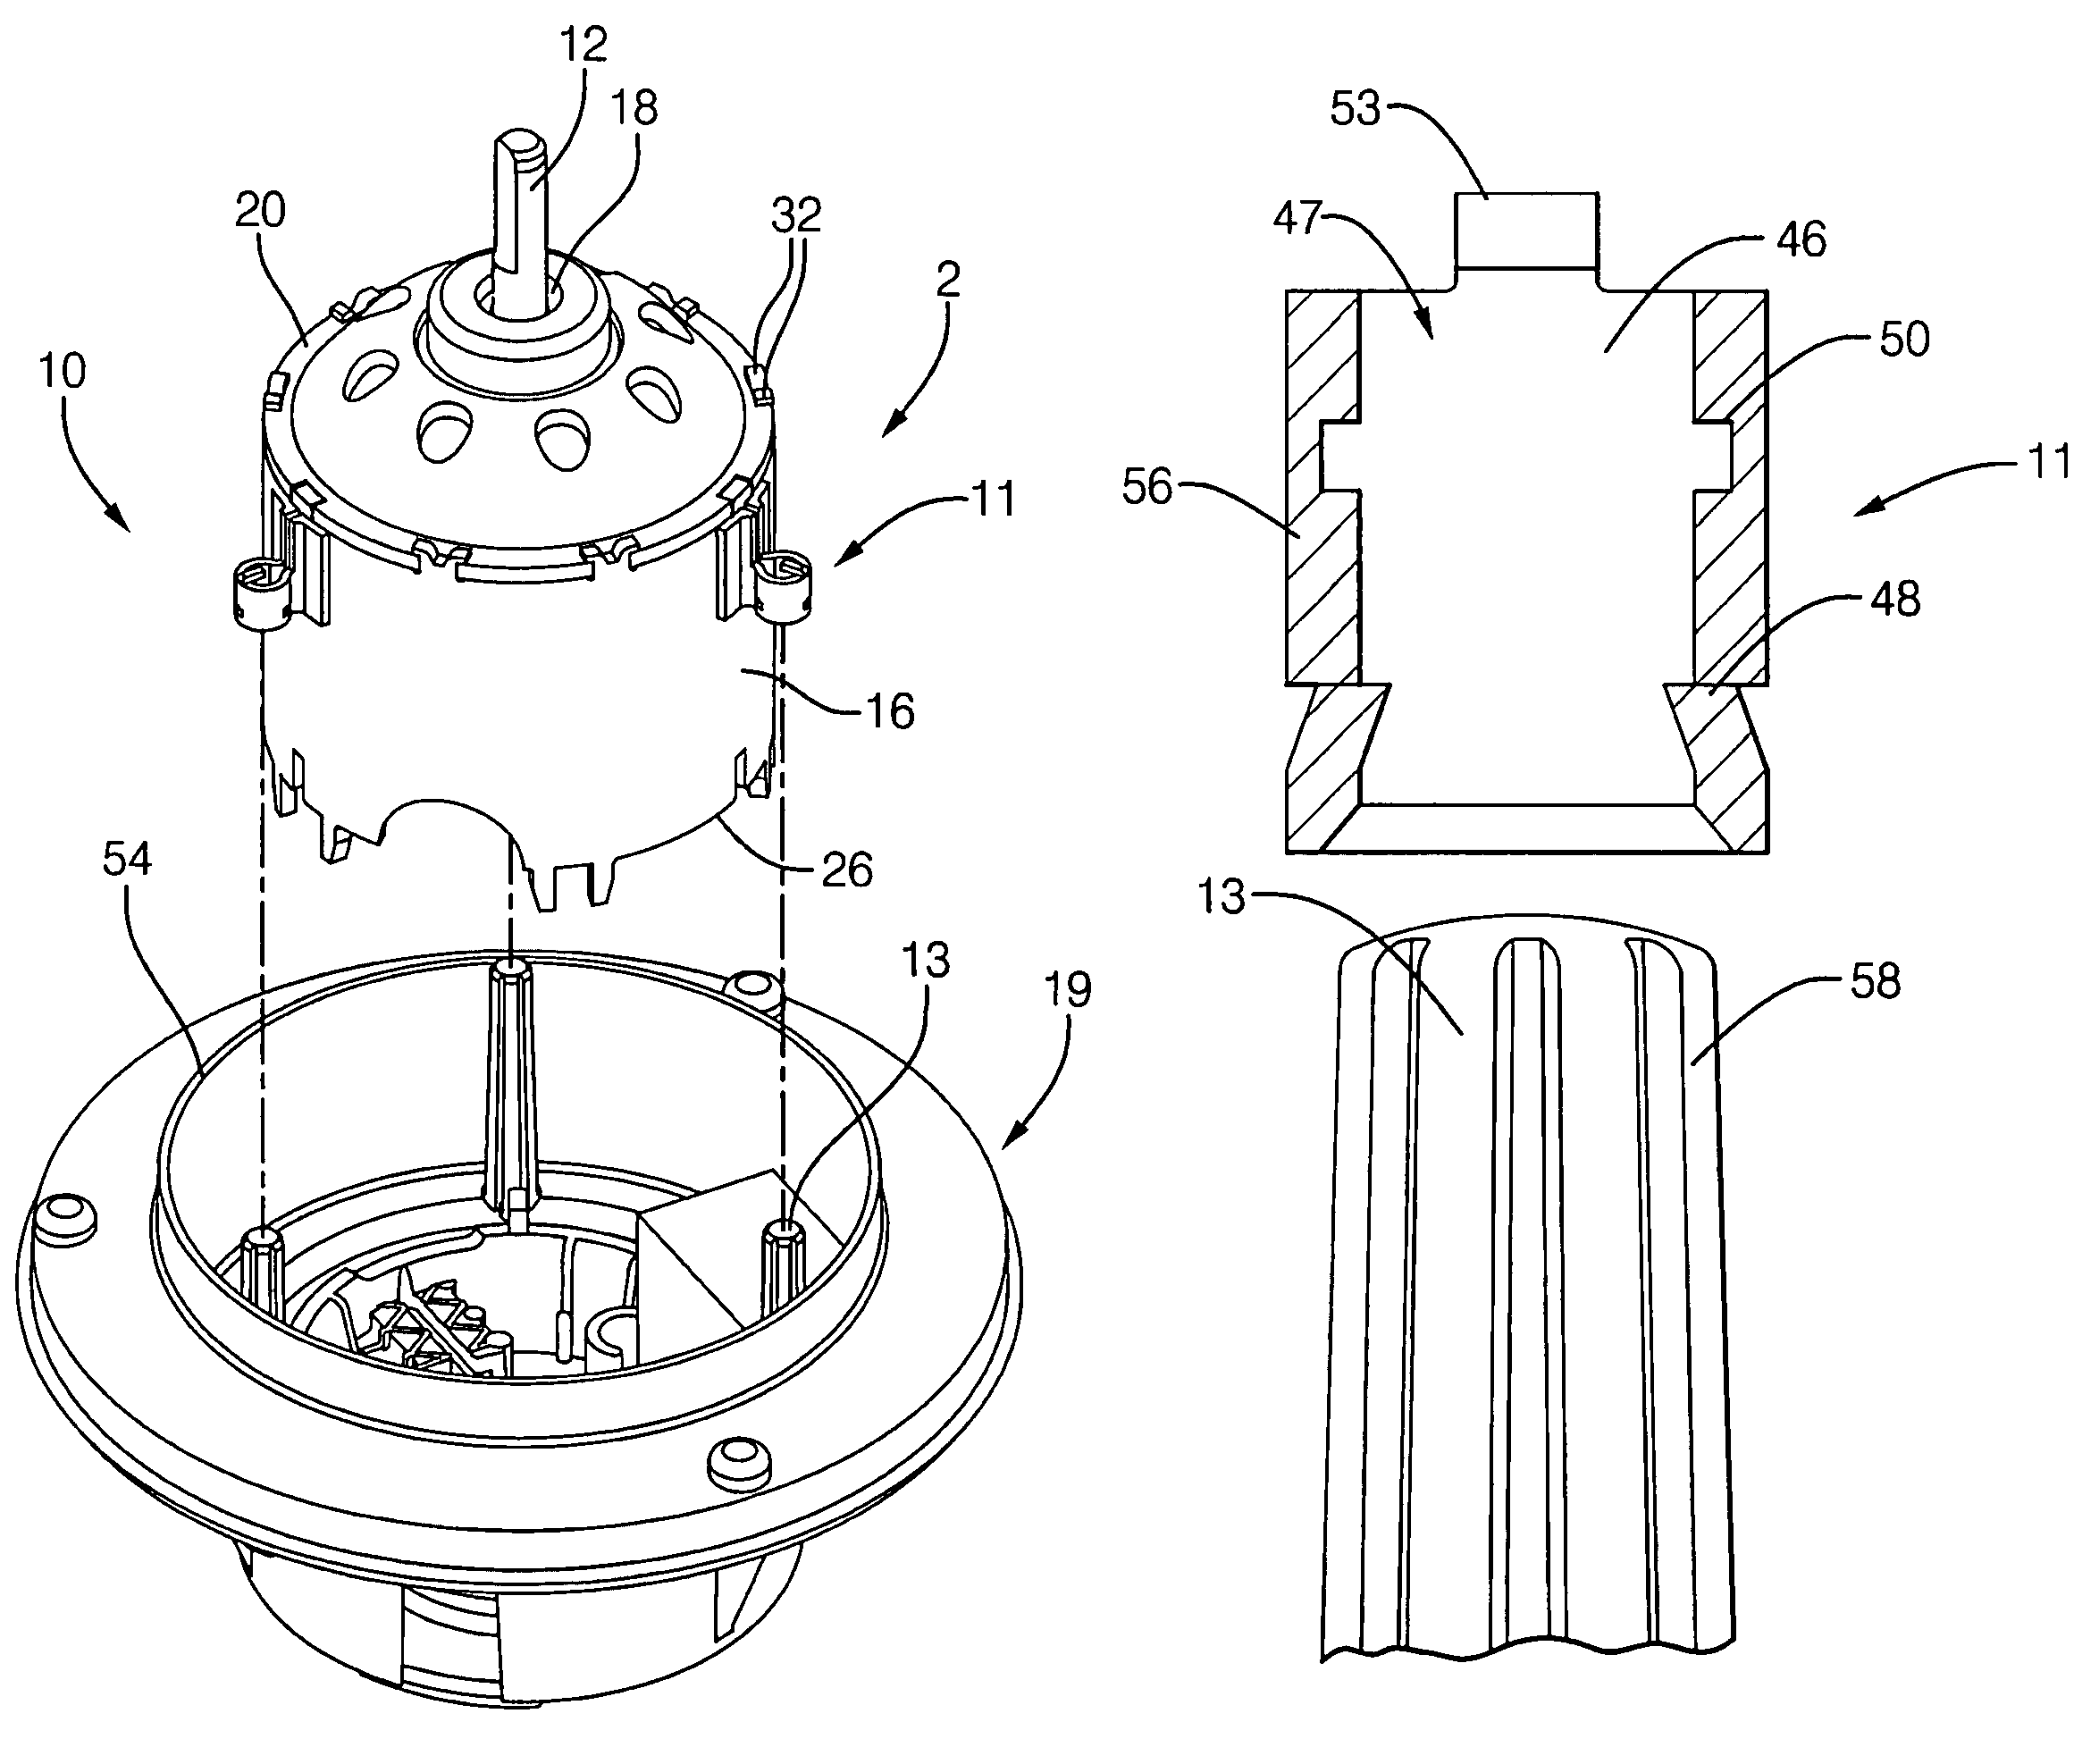 Motor attachment assembly for plastic post isolation system